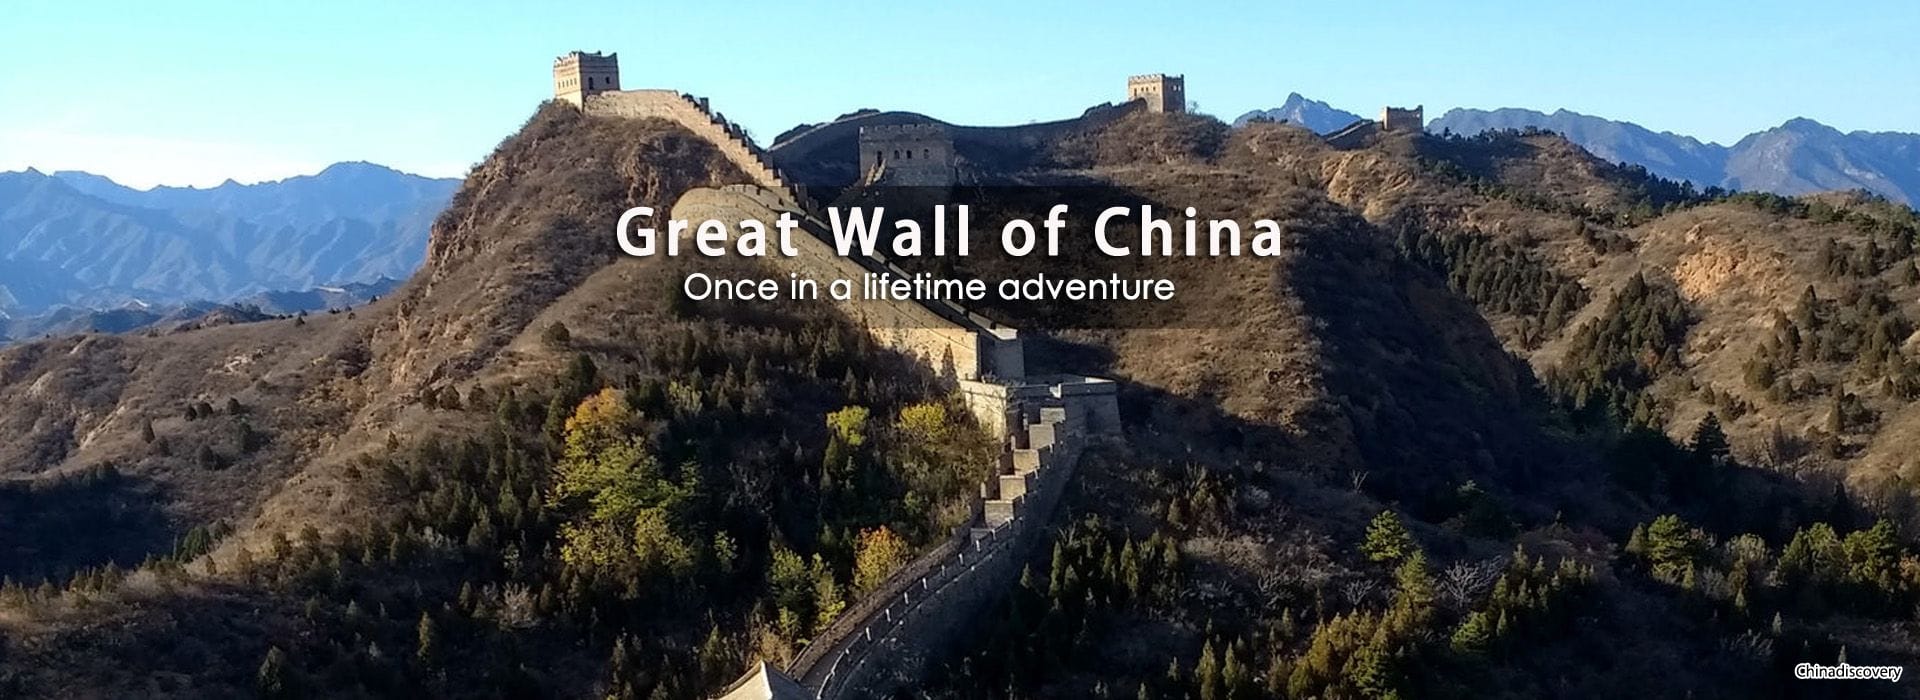 great wall of china tourist guide